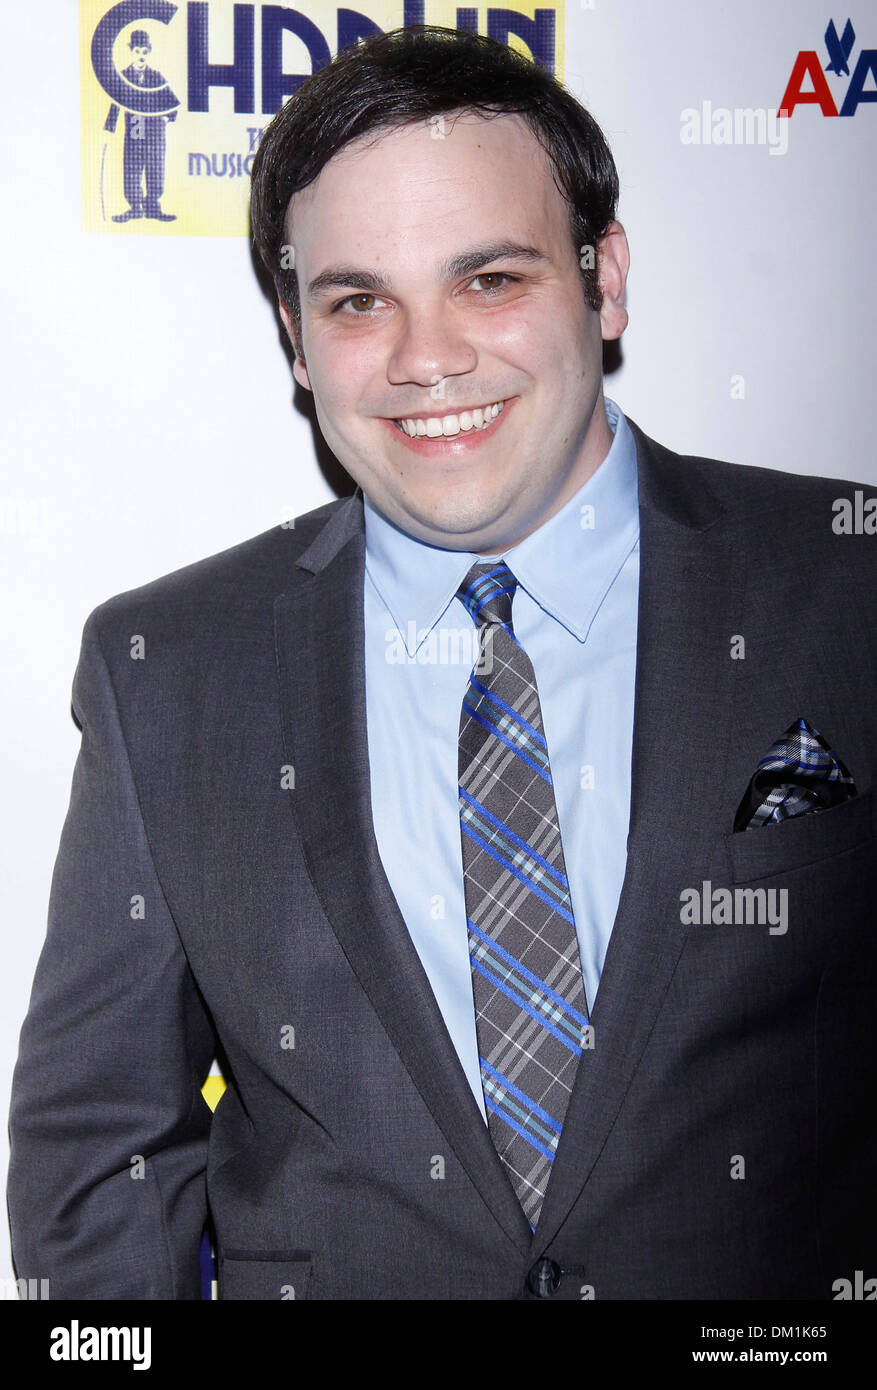 Michael Mendez attending Broadway opening night after party for 'Chaplin Musical' held at Gotham Hall New York City USA - Stock Photo